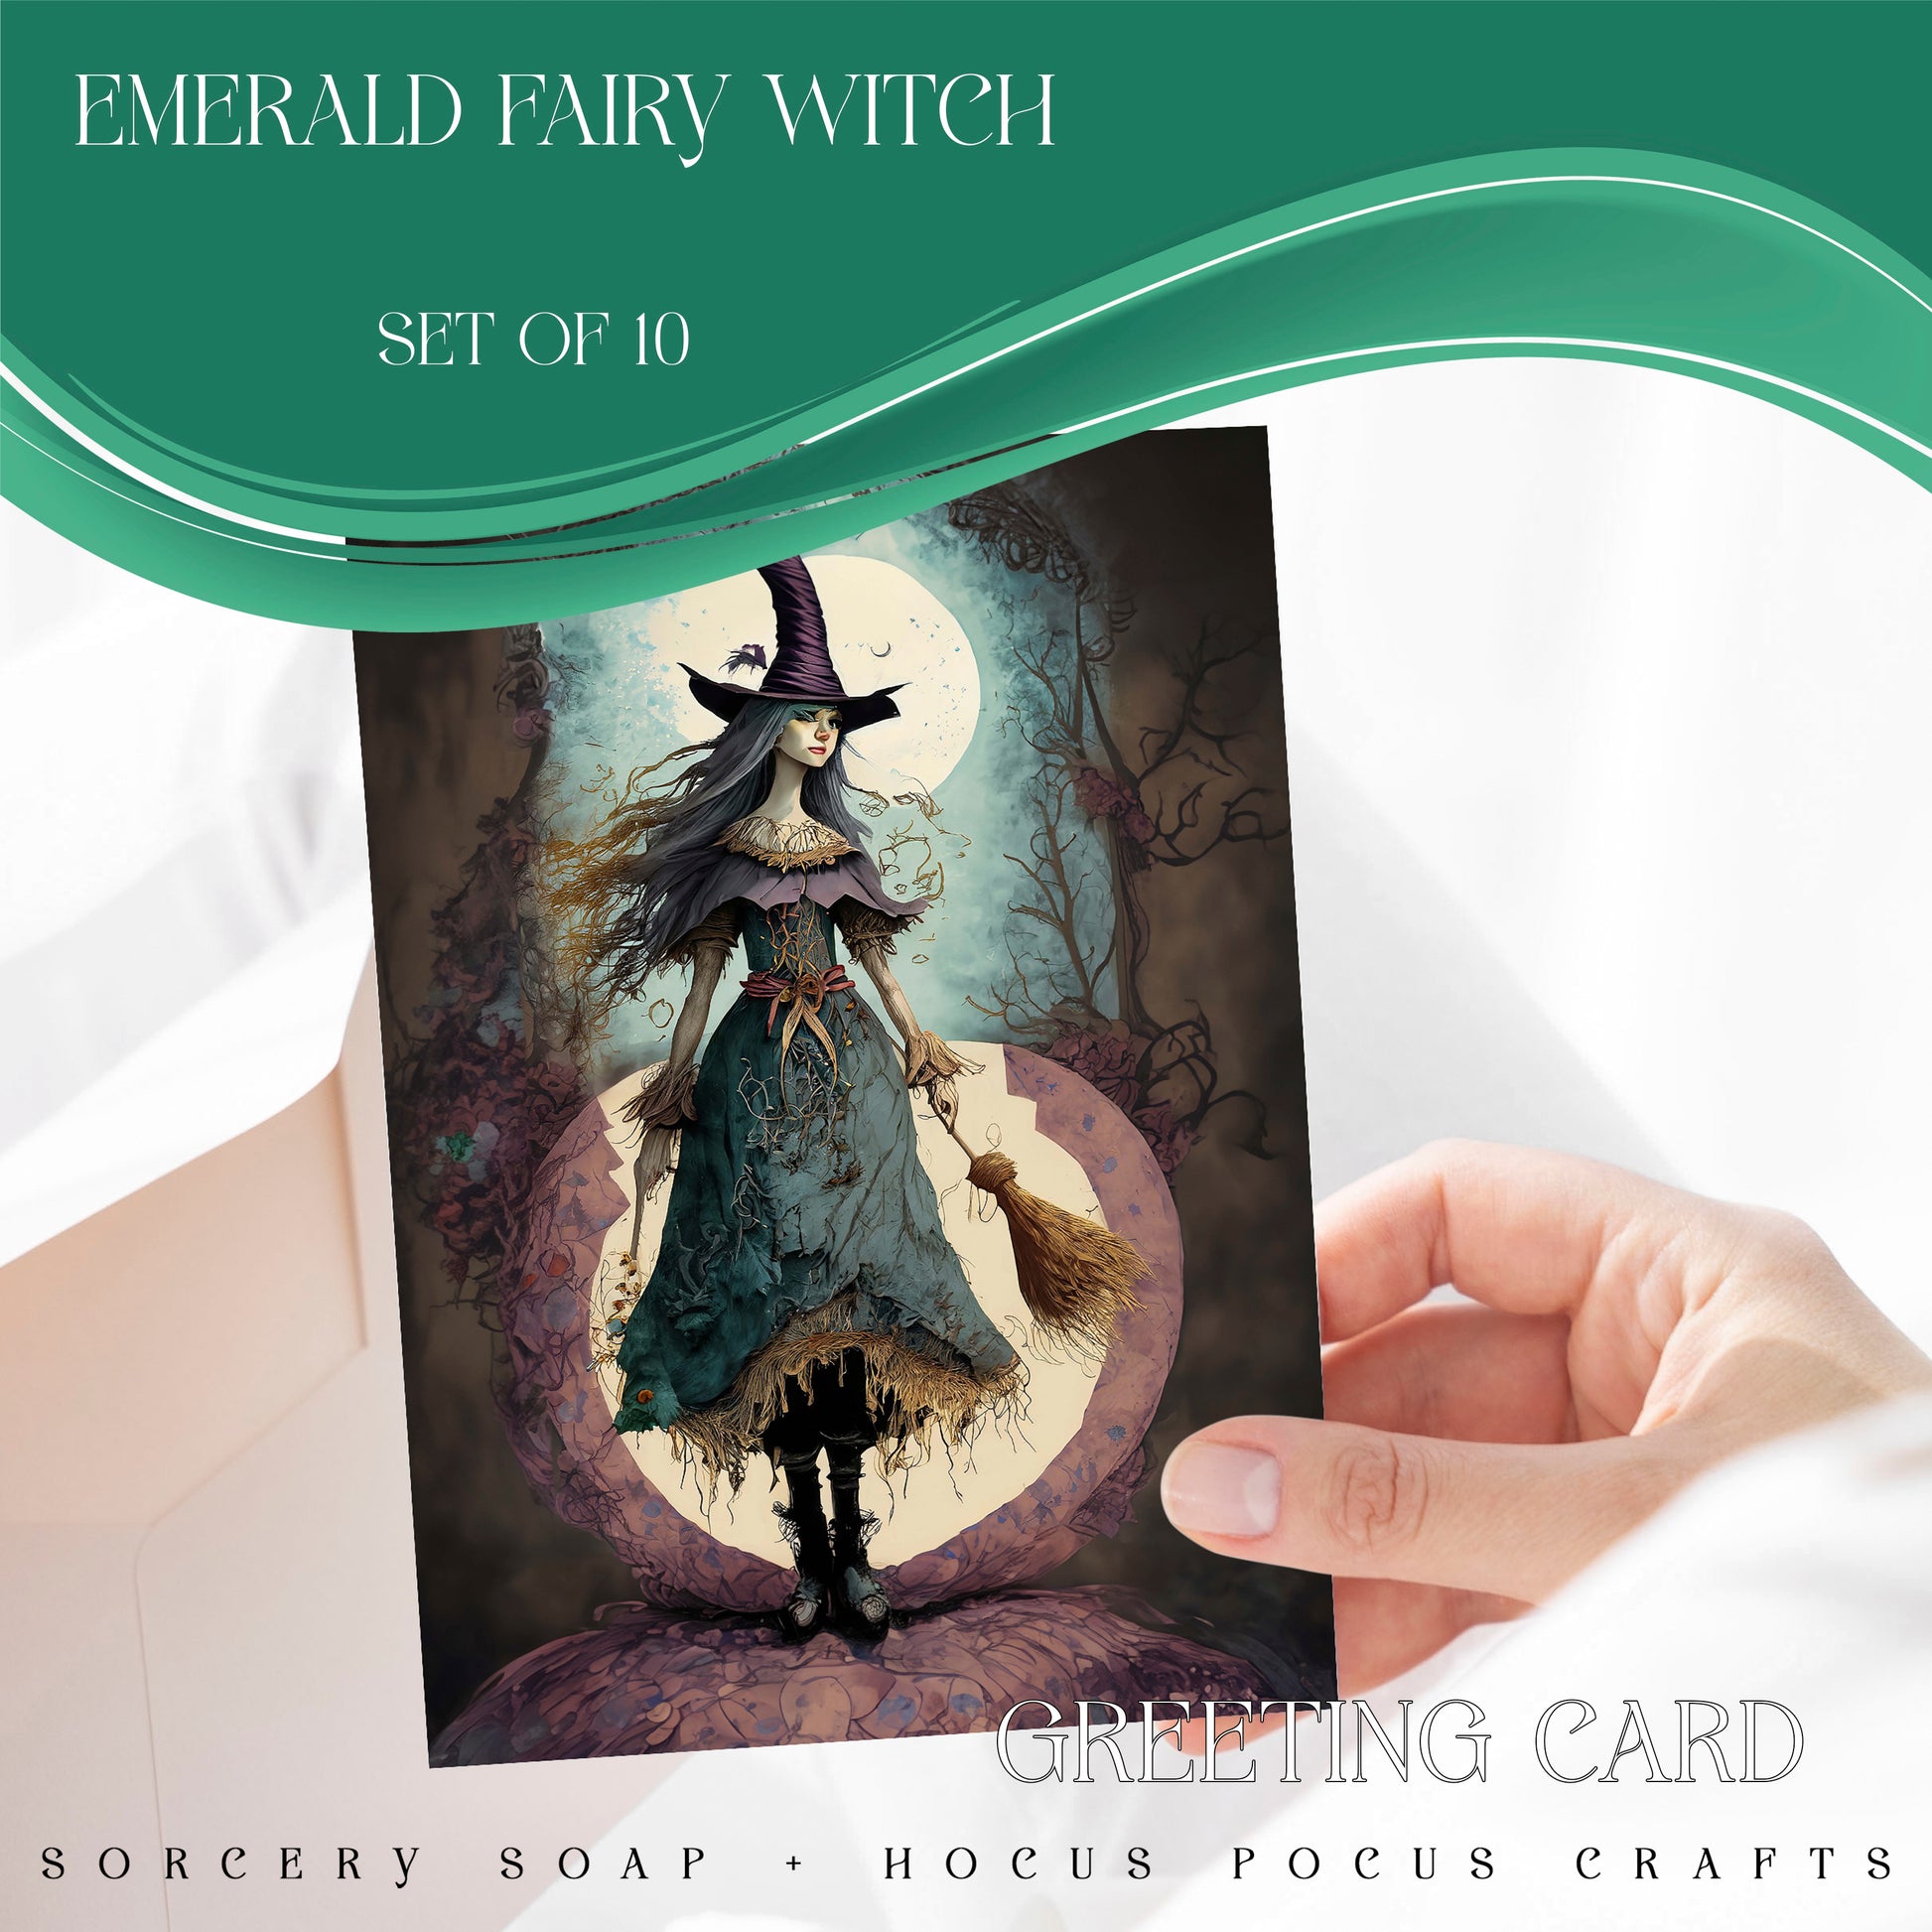 Emerald Fairy Witch Greeting Card